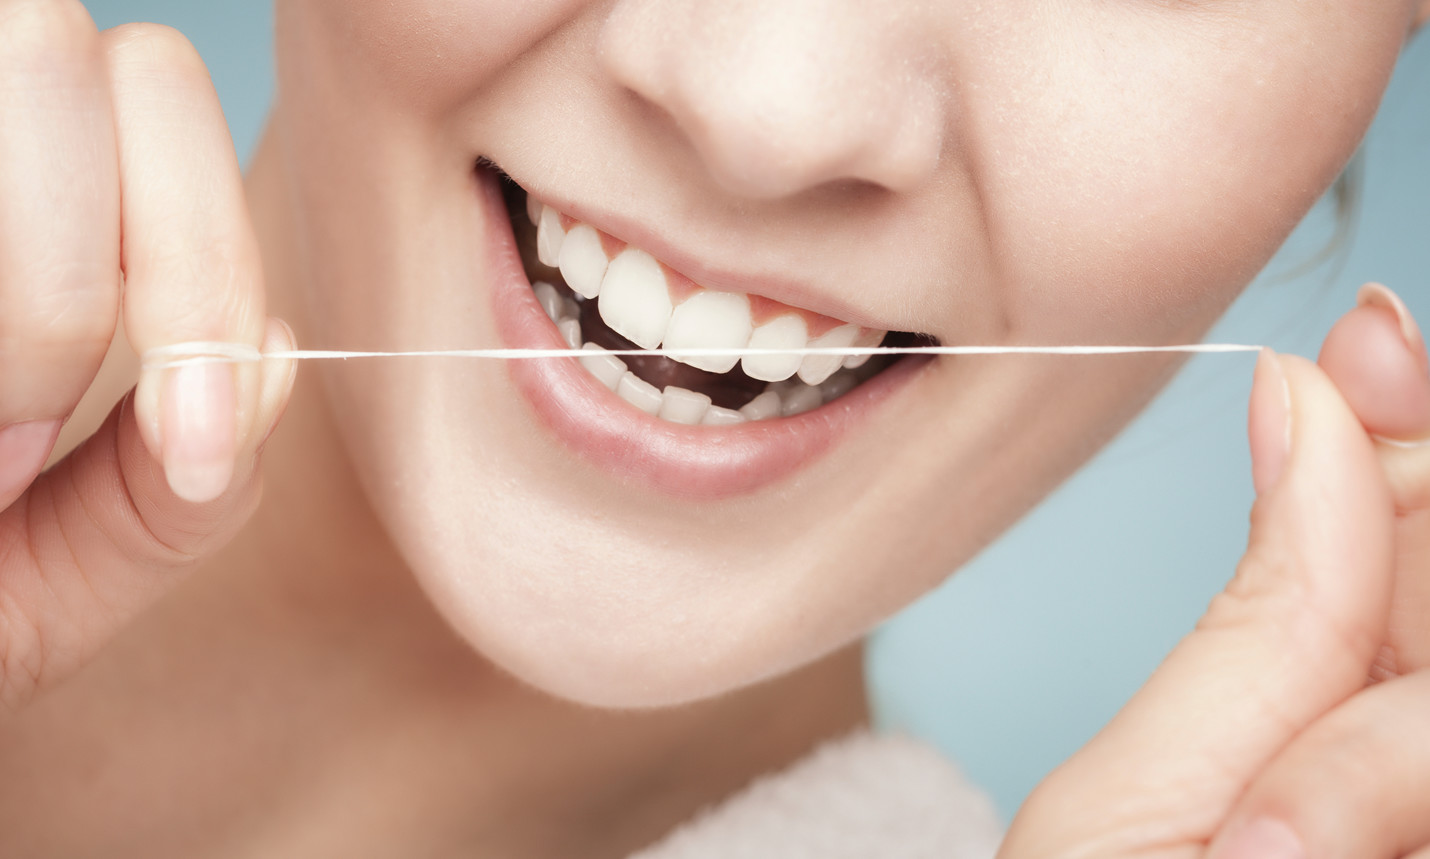 What are the Healthy Habits for Dental Care | HealthSoul